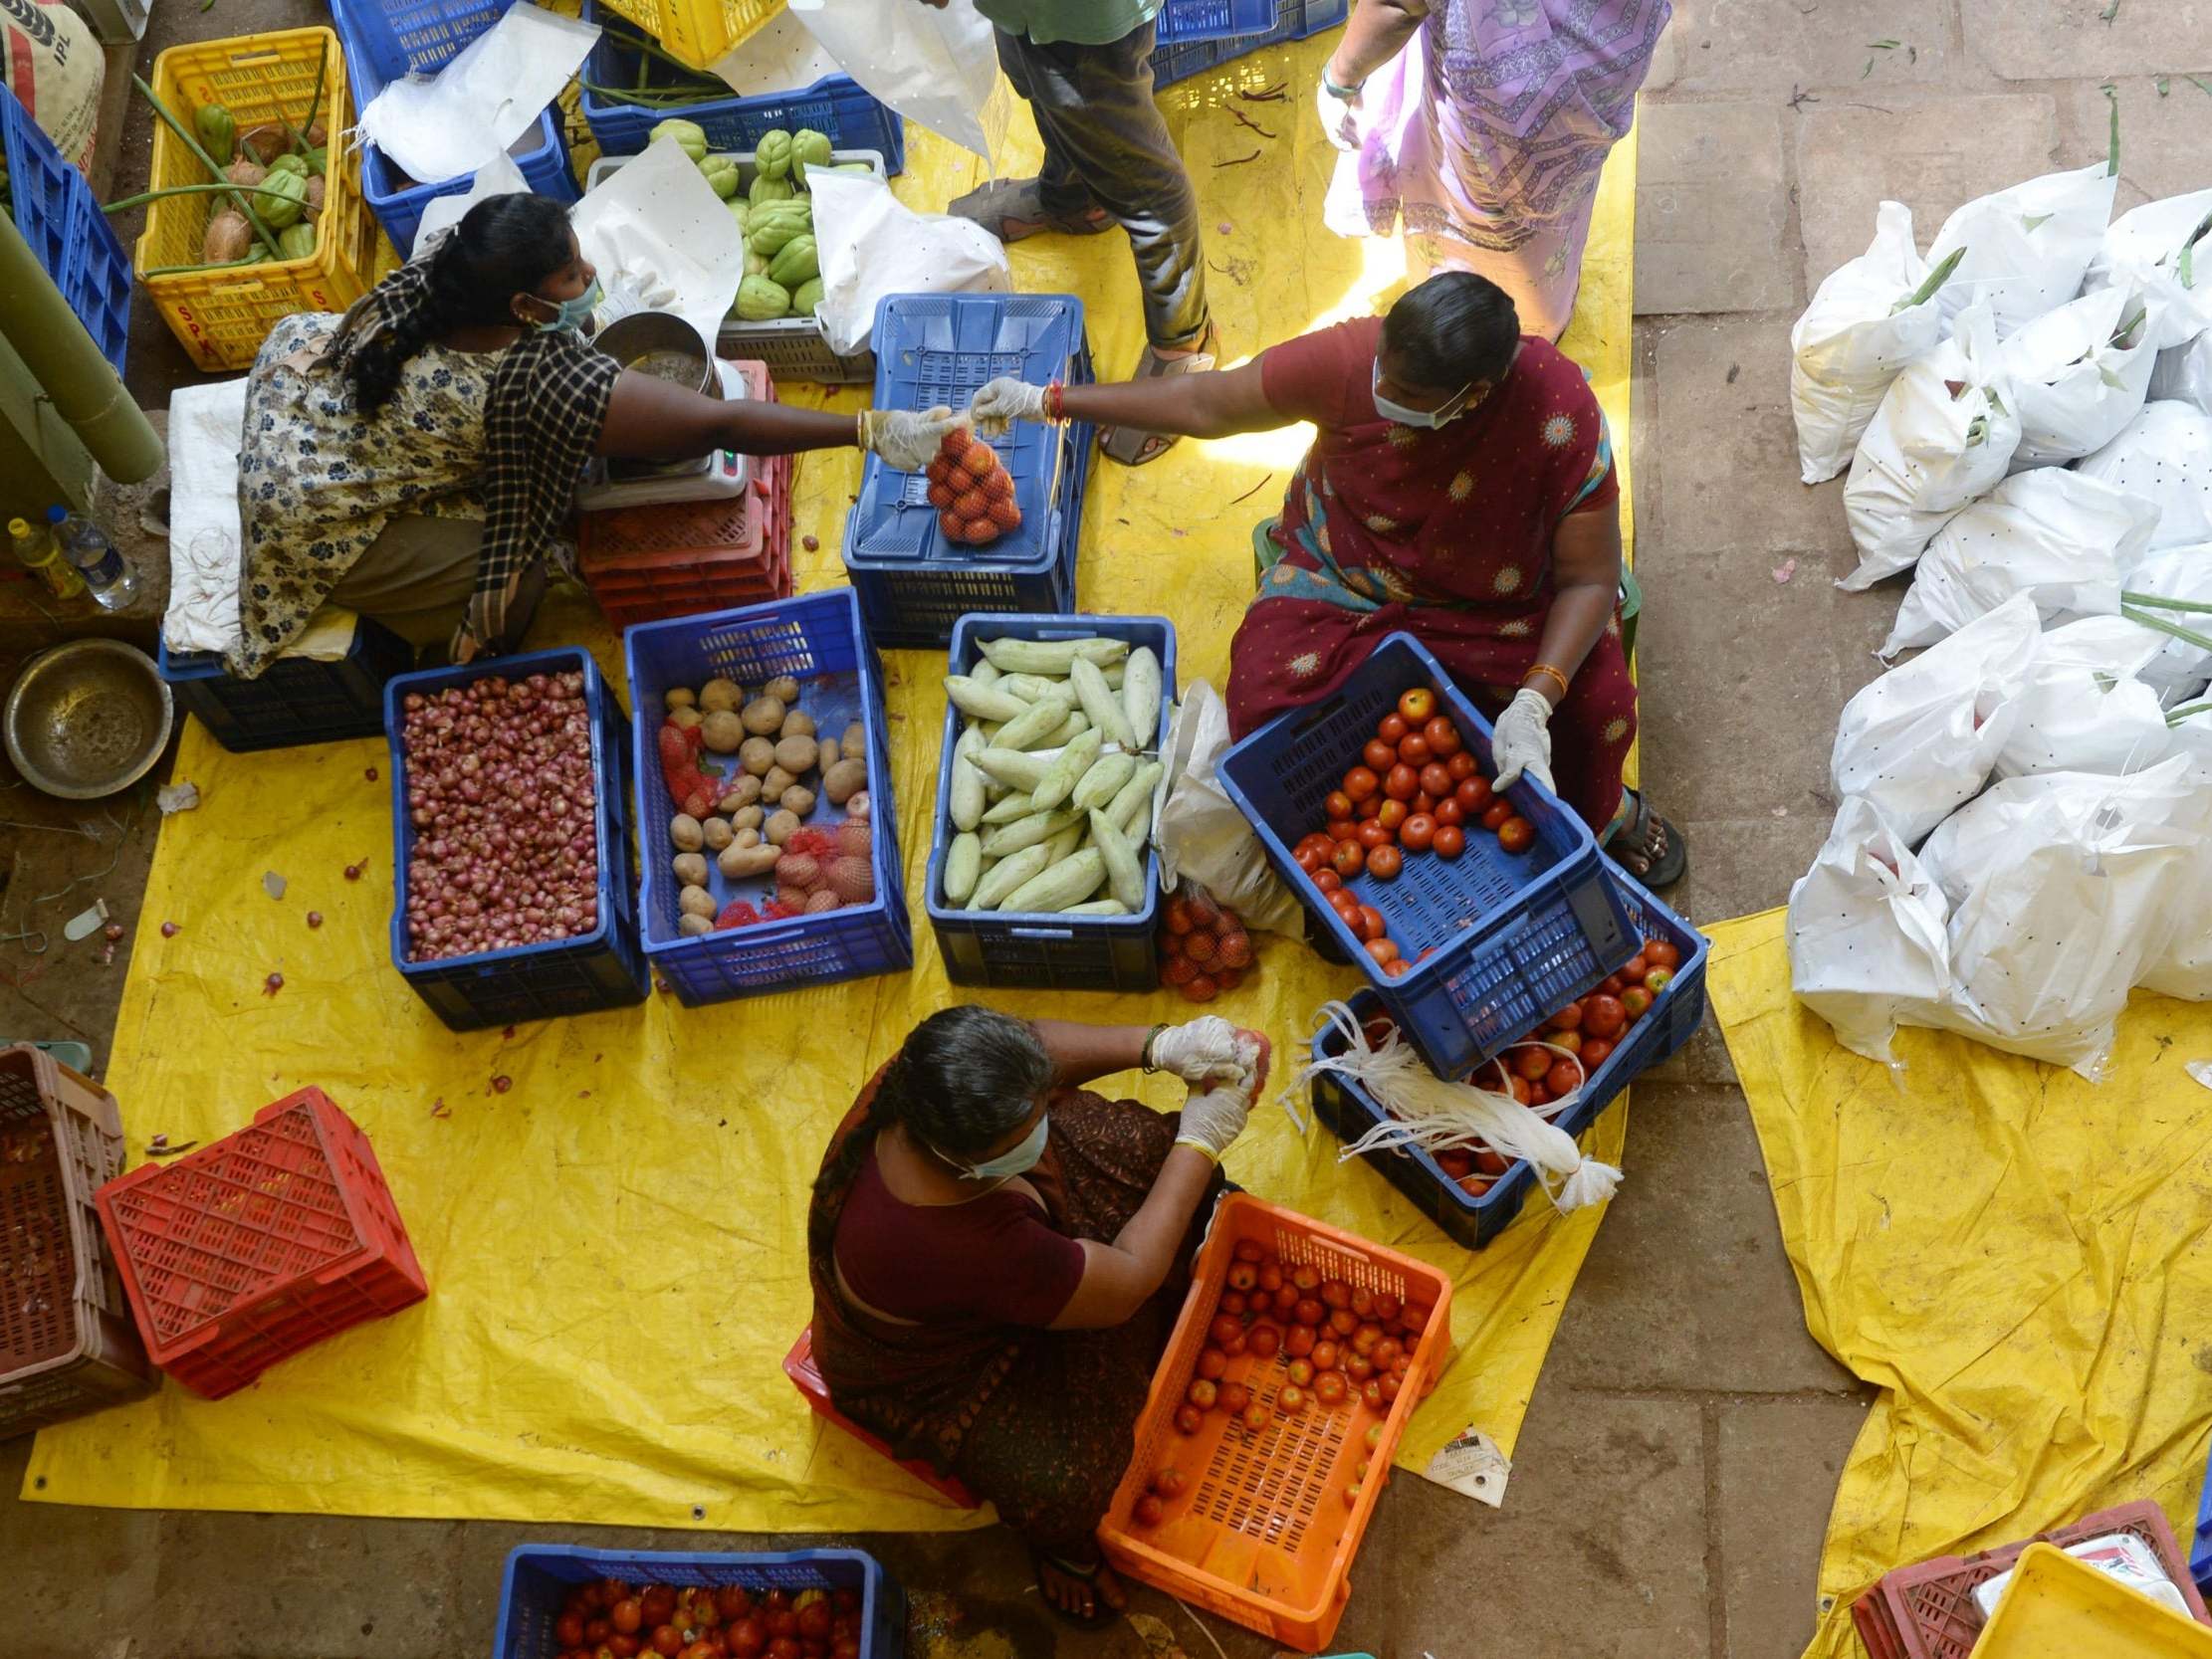 Workers wearing facemasks pack pre-ordered vegetables for distribution at the at Tamilnadu horticulture centre in Chennai